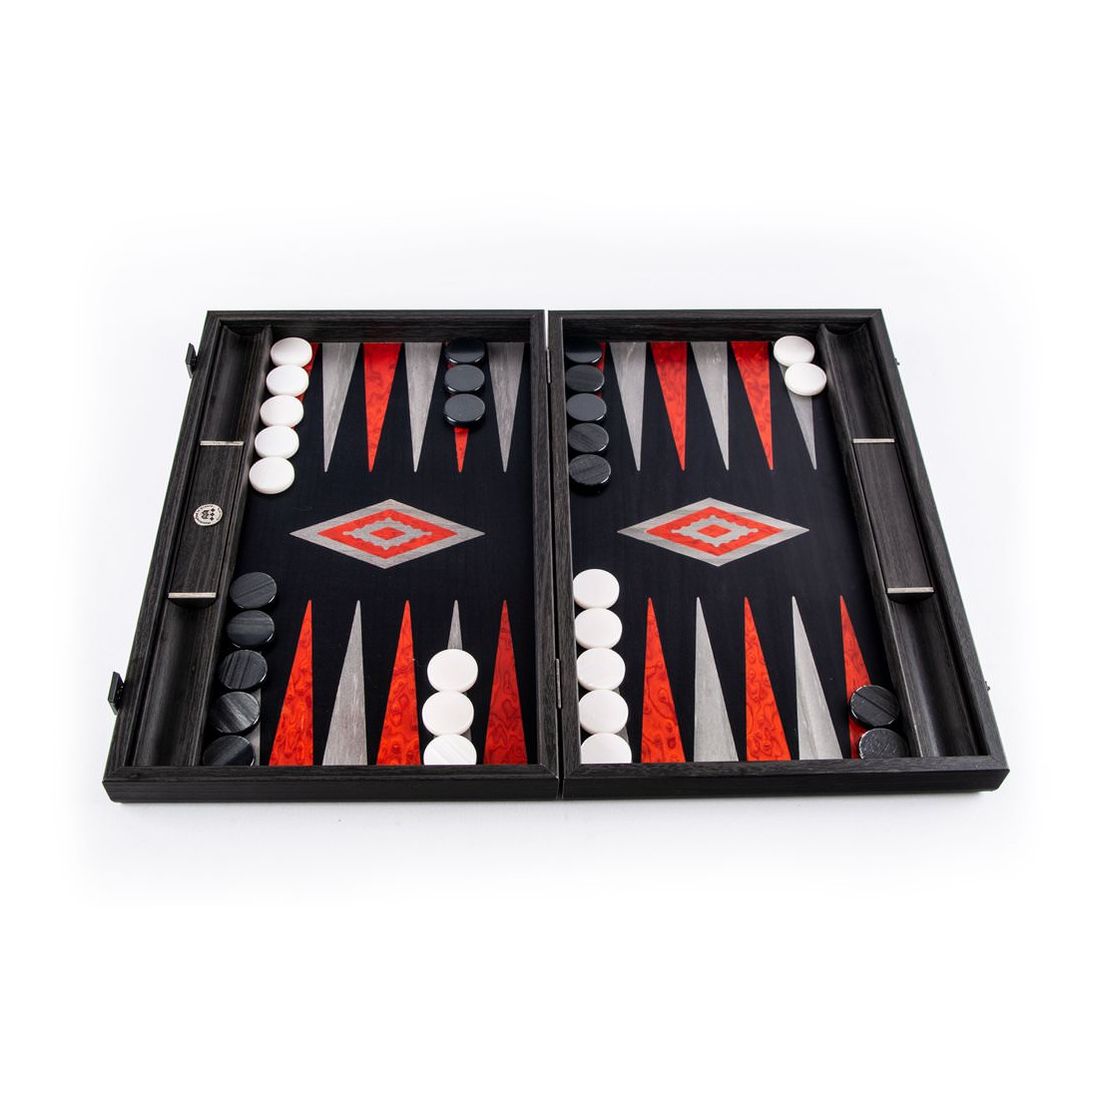 Manopoulos Backgammon Premium Collection - Black Oak with Silver Stripes - Large (48 x 30 cm)